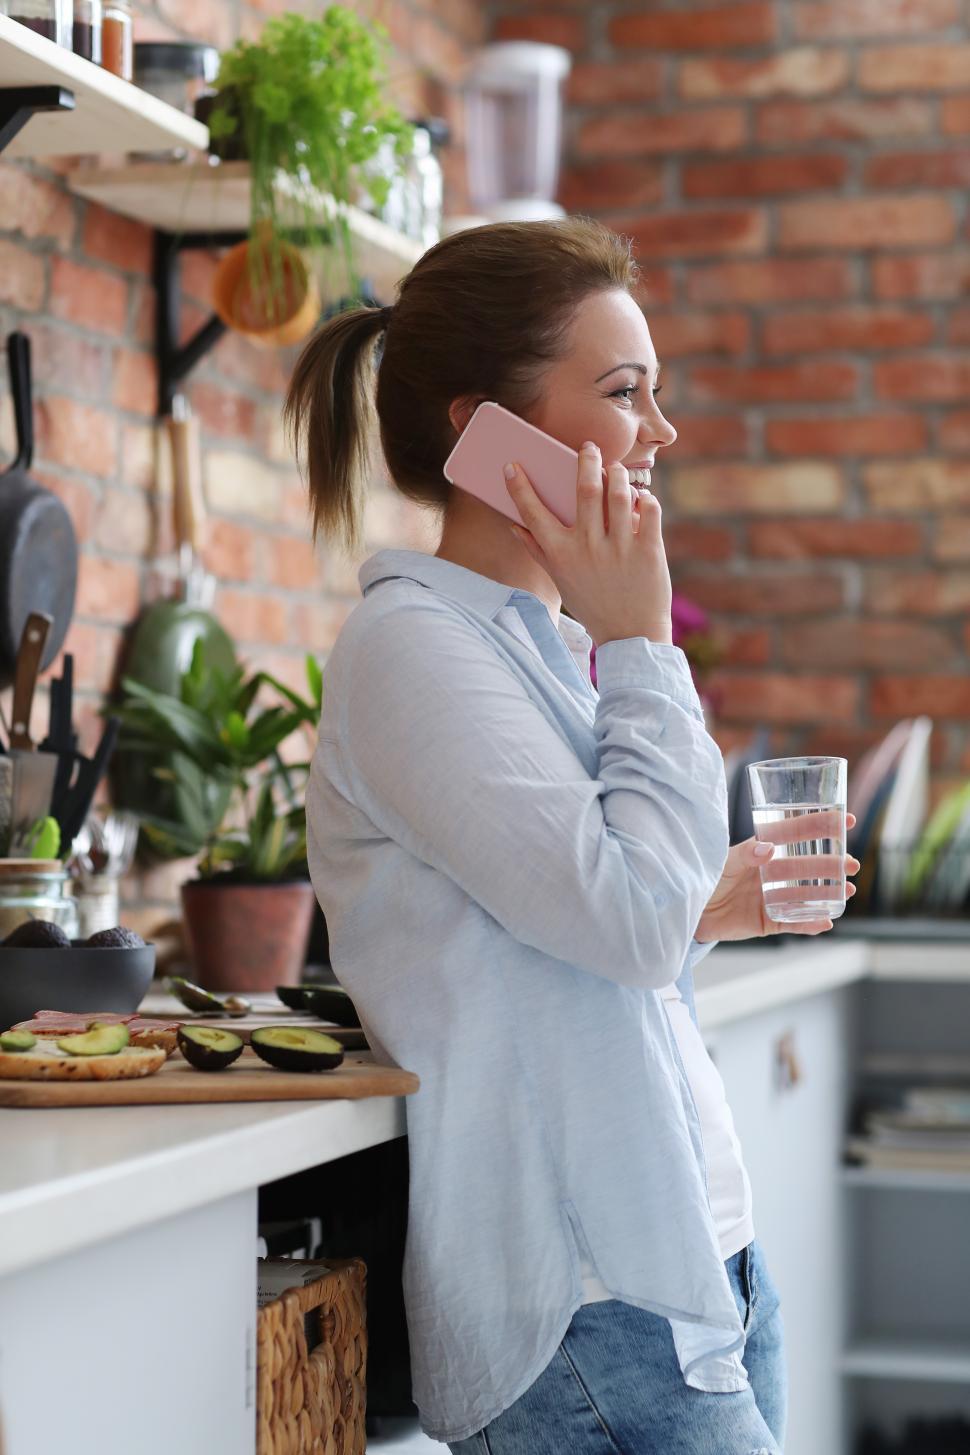 Free Image of Woman in kitchen on her phone 